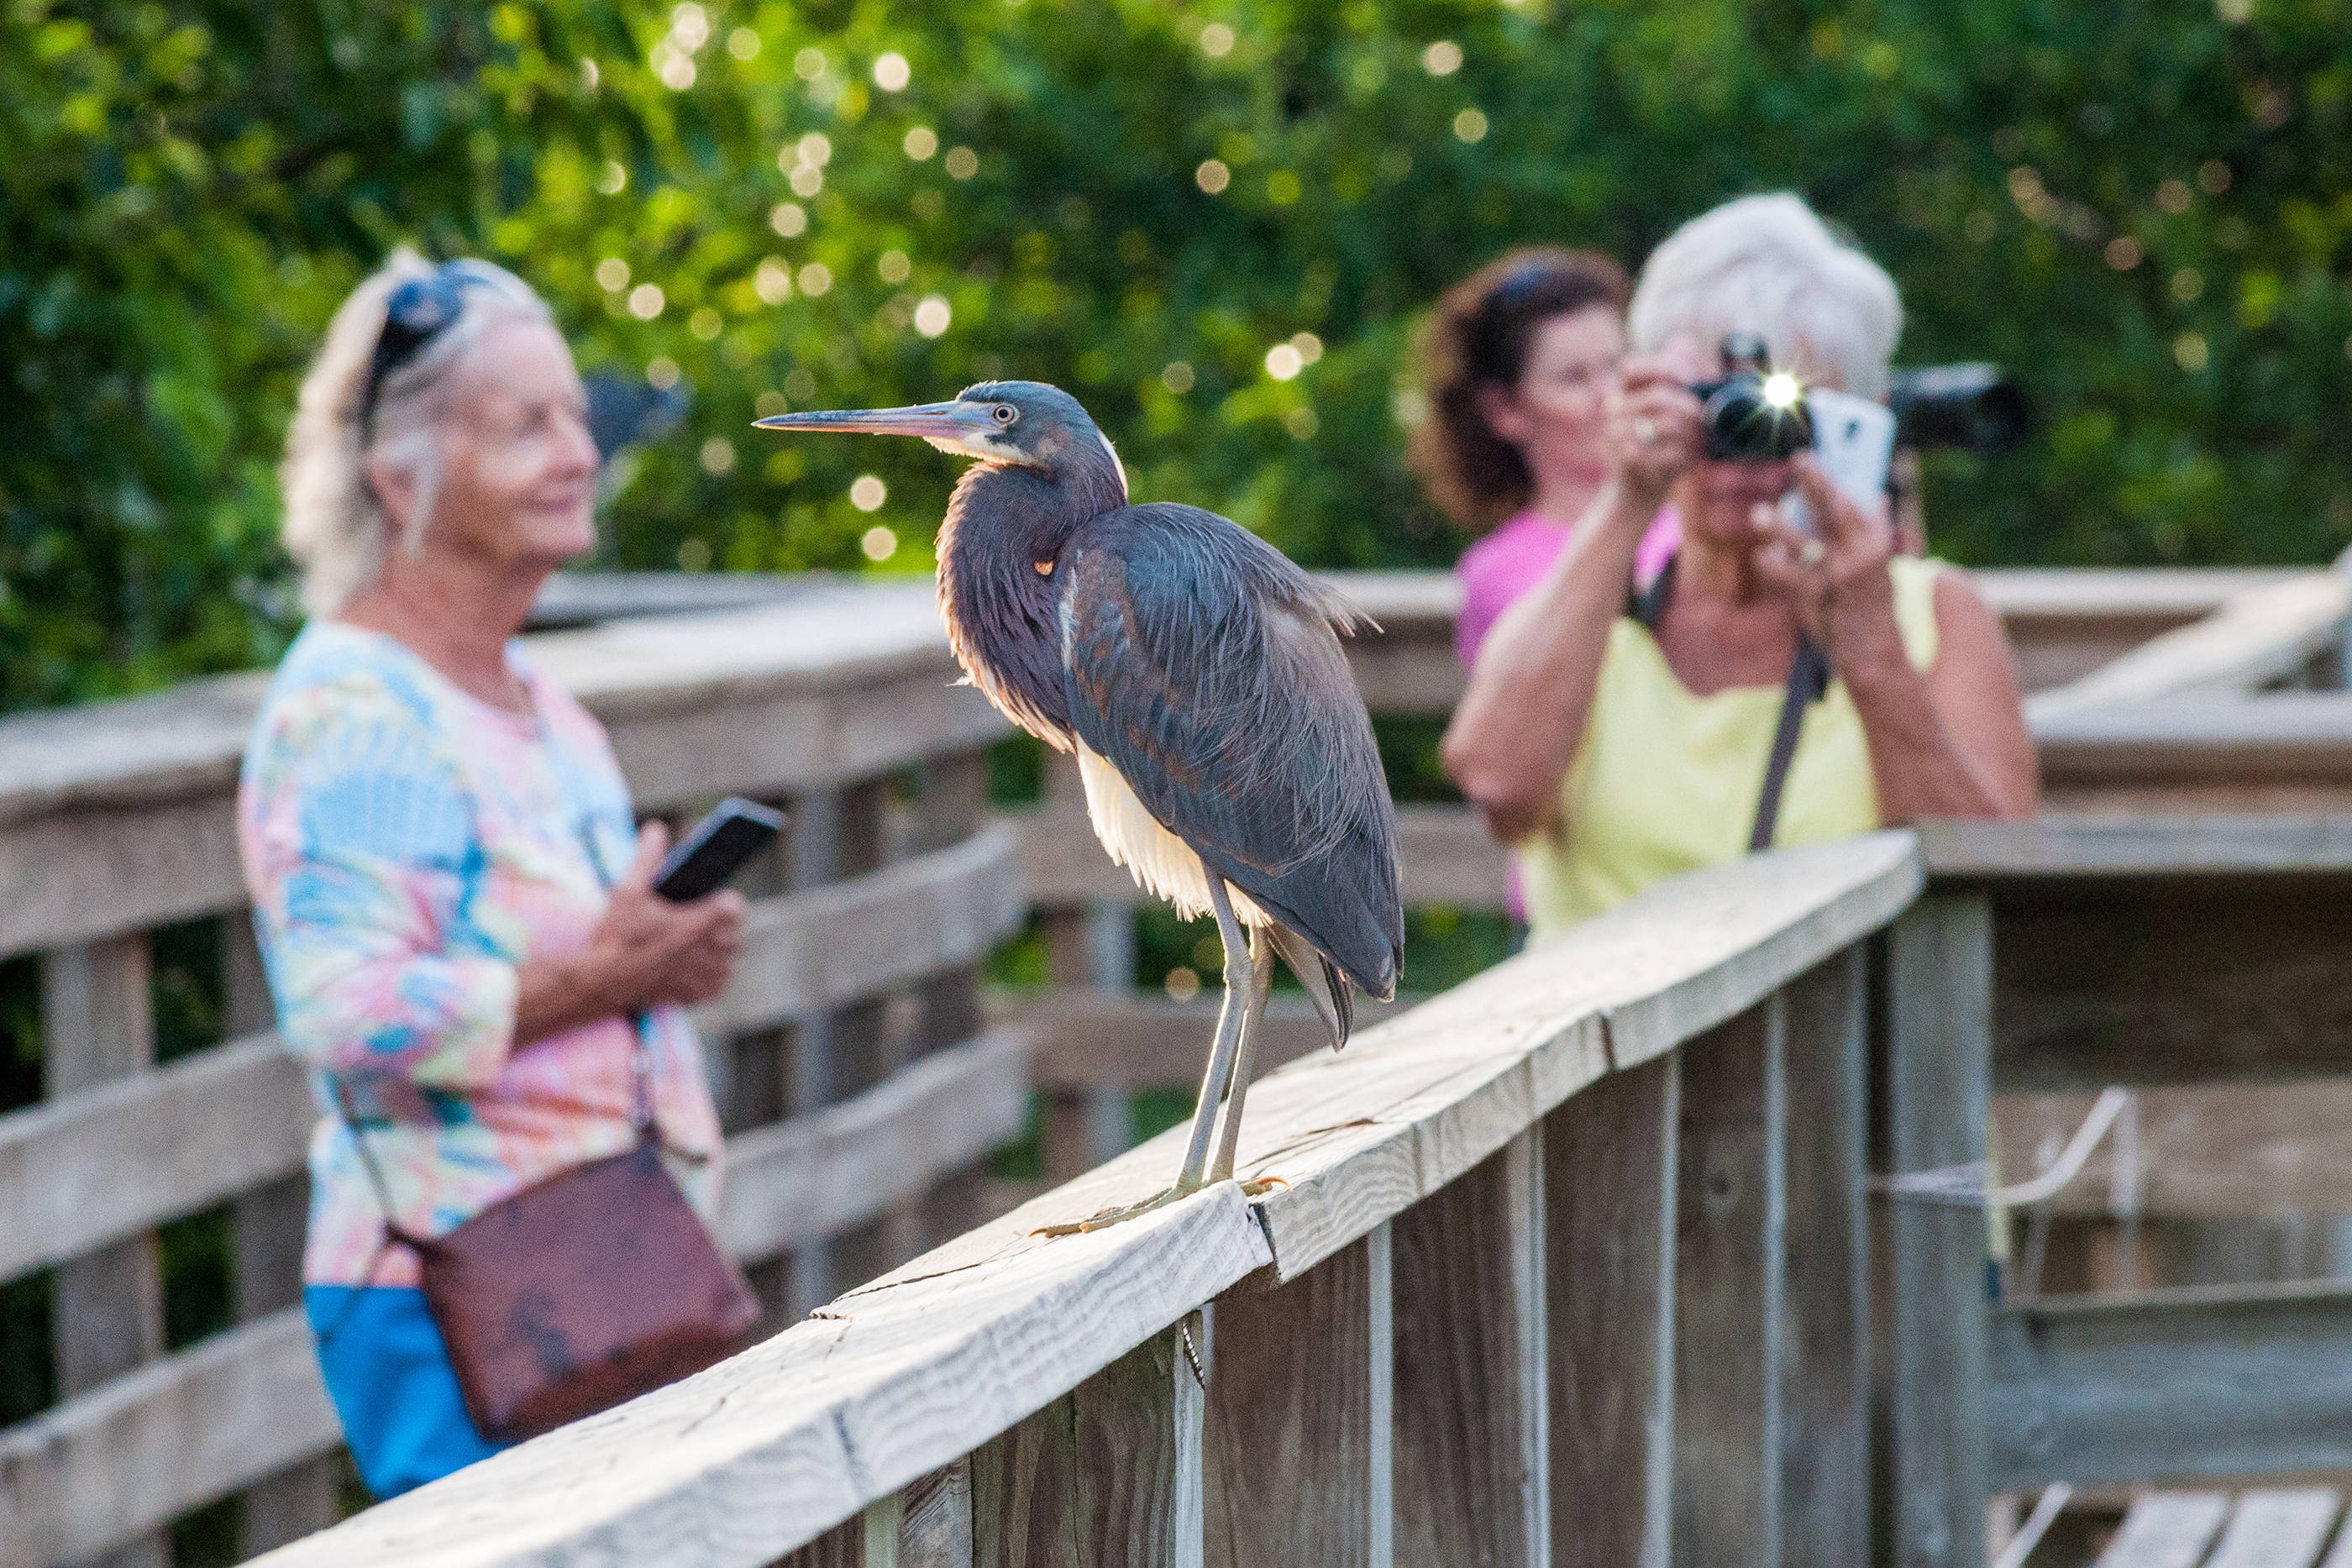 Wakodahatchee Wetlands is a reserve in Delray Beach, with a mile long loop boardwalk over the ponds. Since the birds nest sometimes within touching distance of the boardwalk, they are well acclimated to humans. Here a tri colored heron lands on the boardwalk